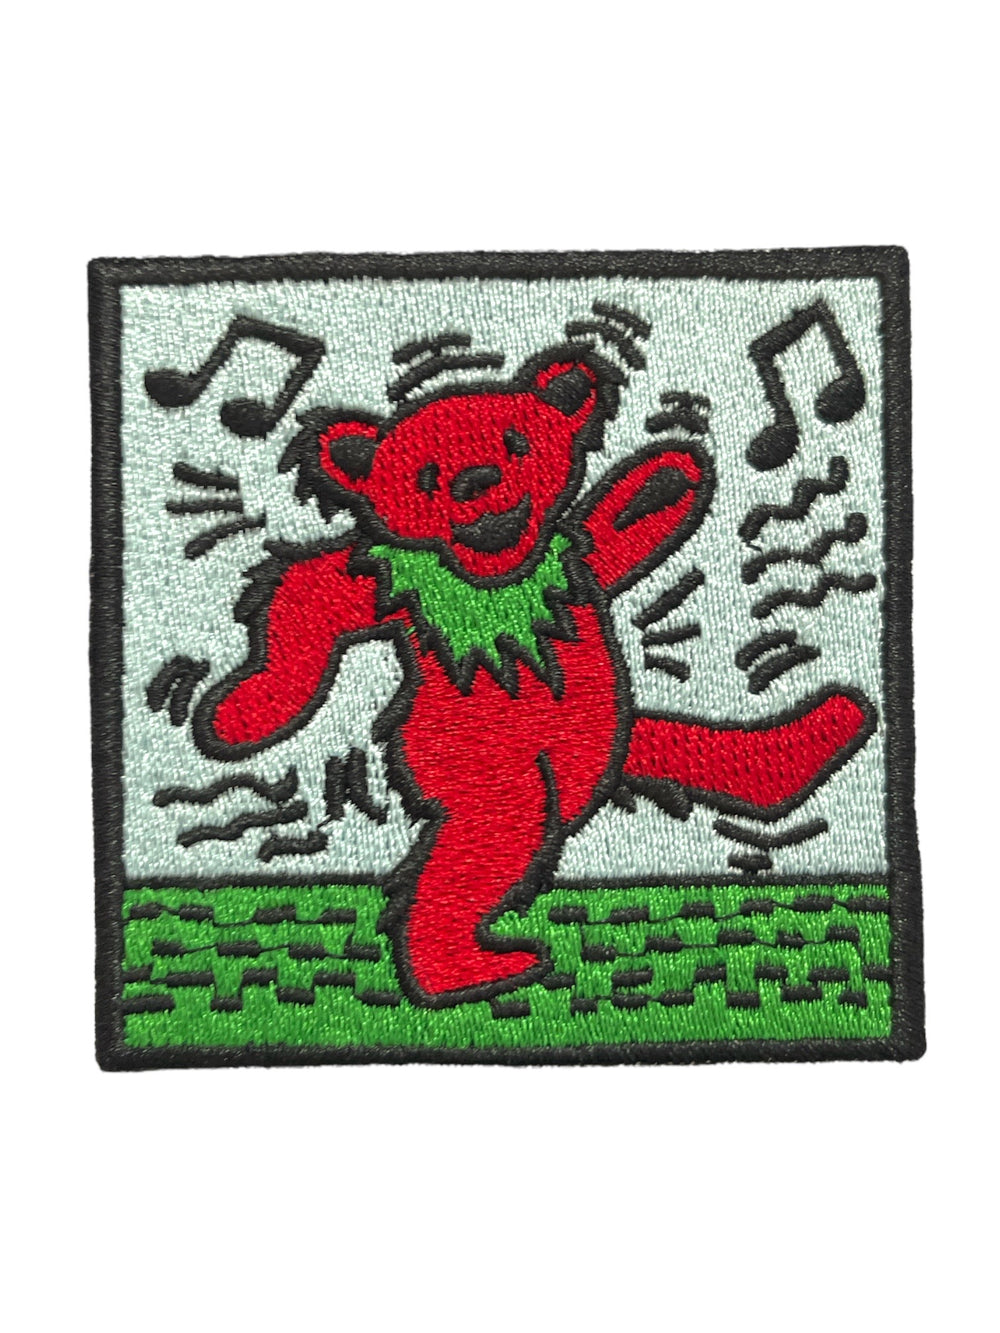 Grateful Dead Dancing Bear Square Official Woven Patch Brand New